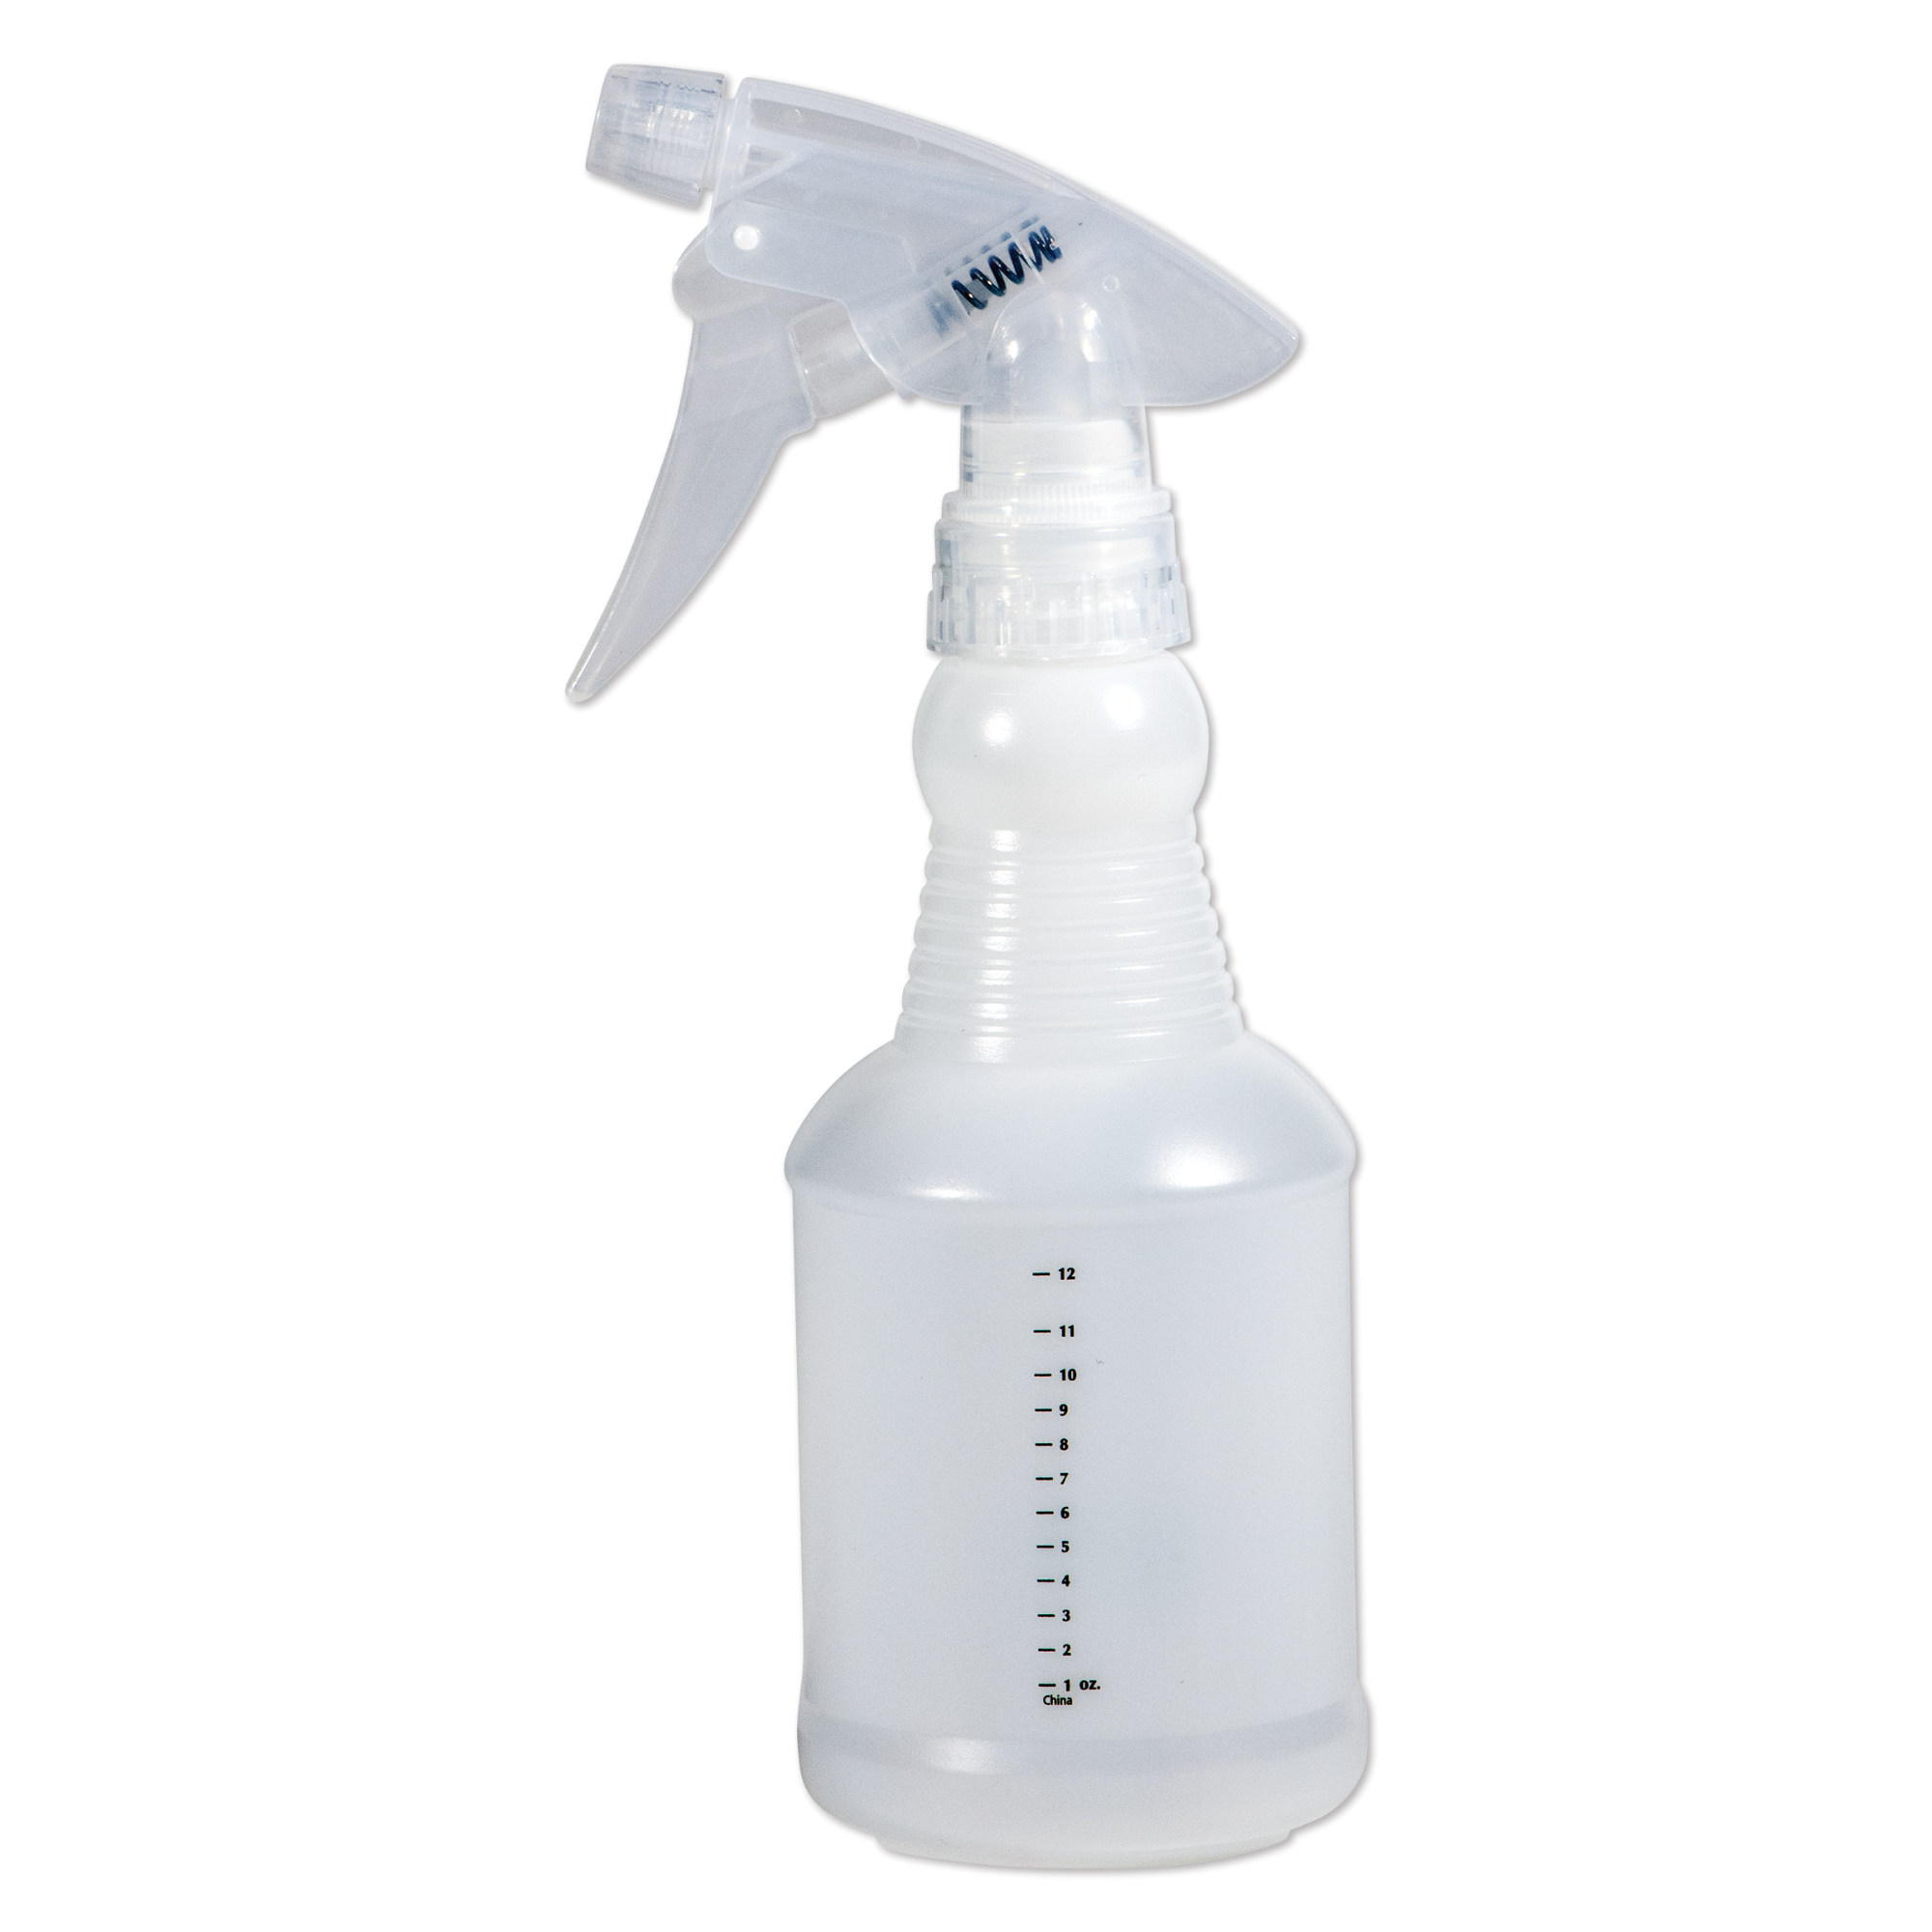 Spray Bottle with Measurement Scales, 12 oz.